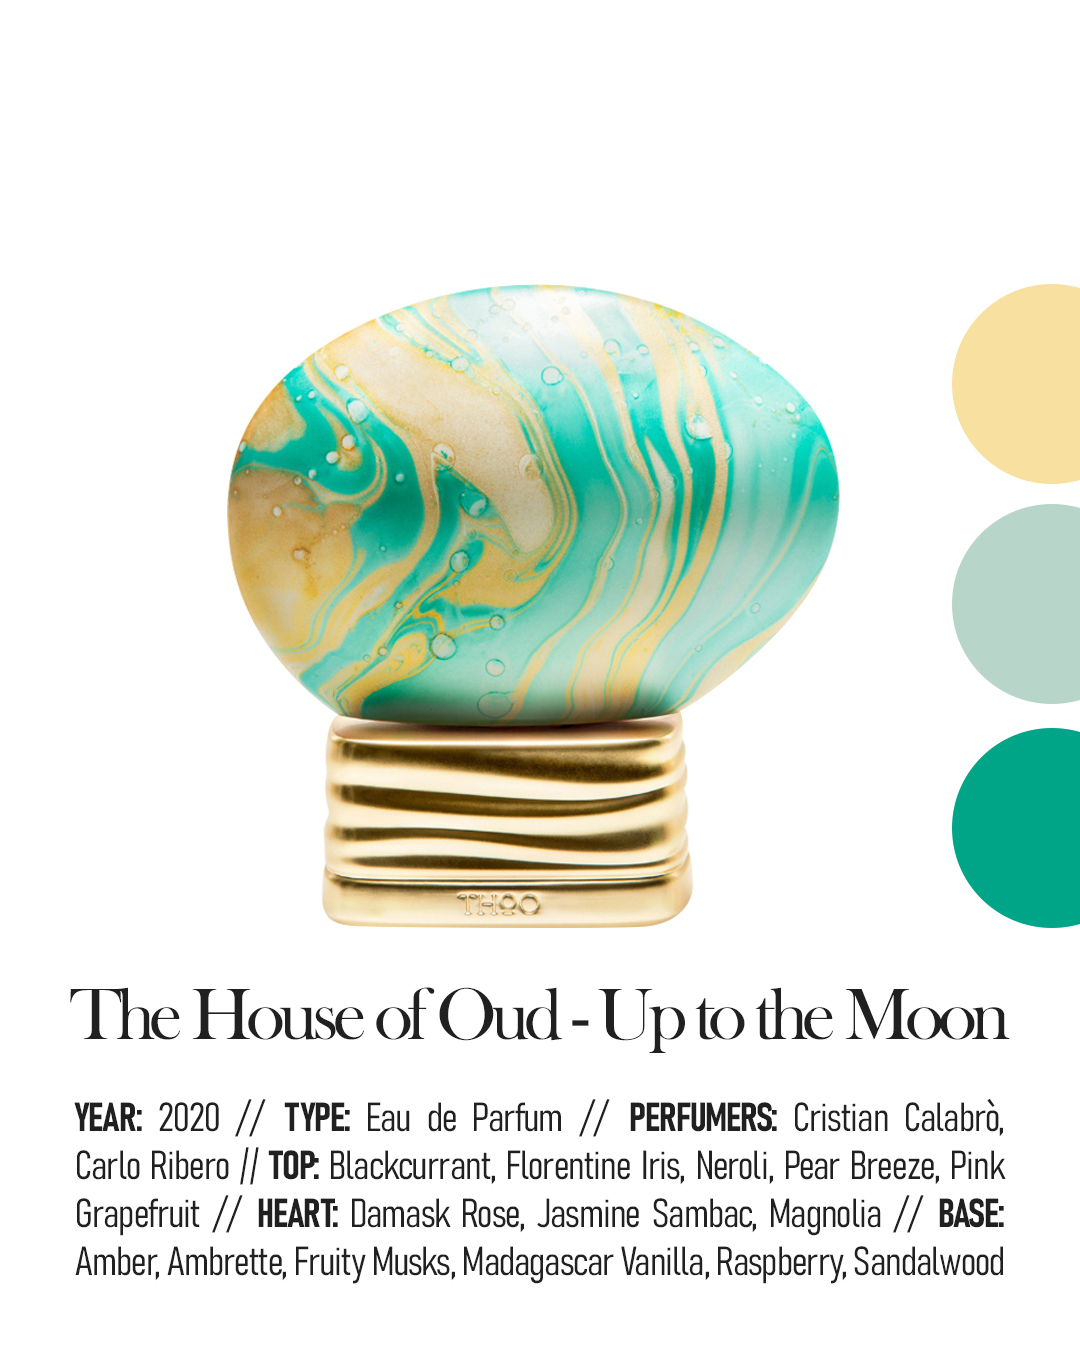 The House of Oud - Up to the Moon